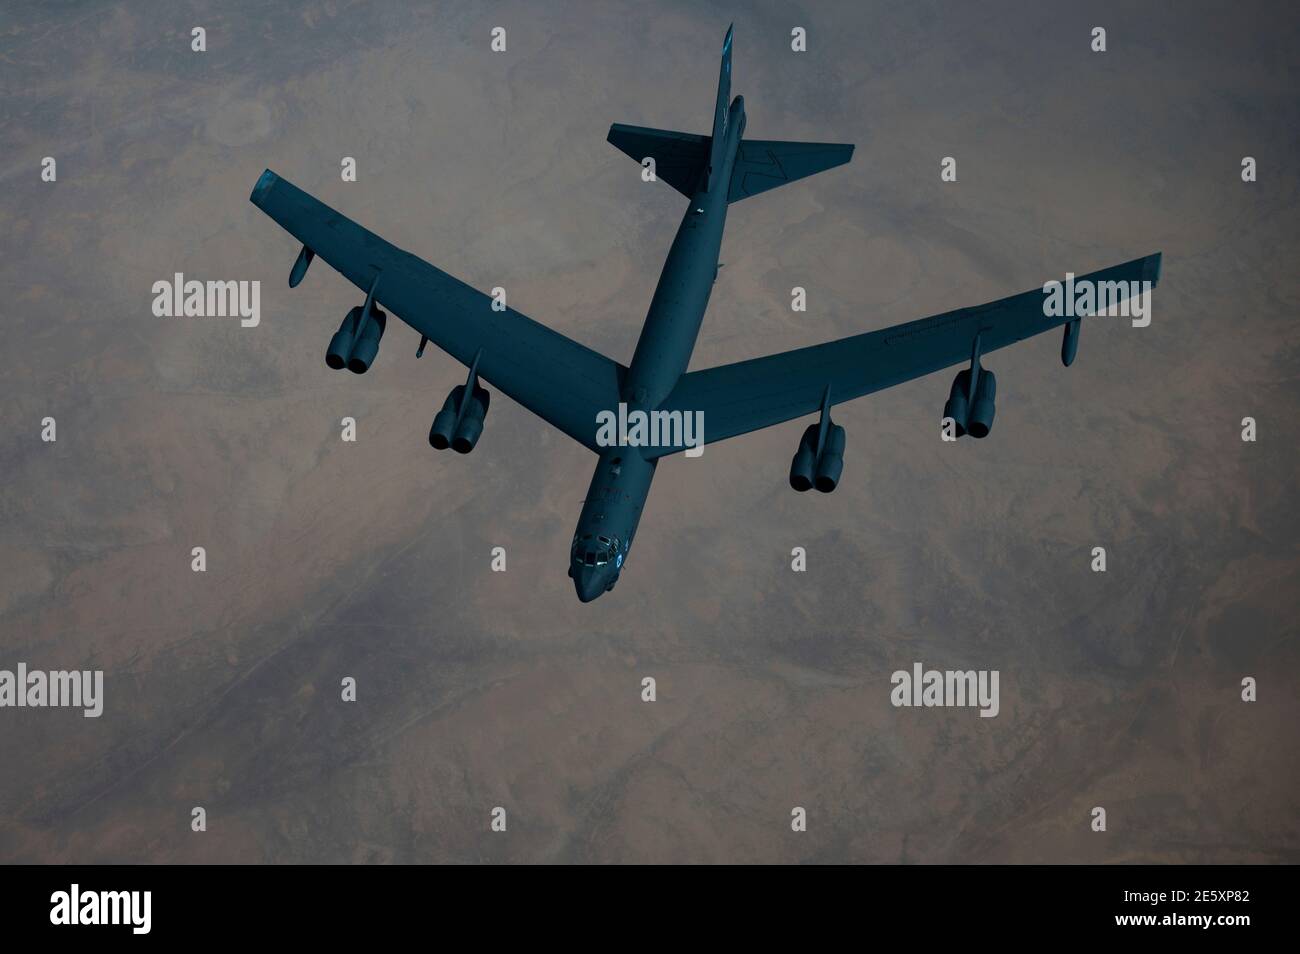 Persian Gulf, Saudi Arabia. 27th Jan, 2021. A U.S. Air Force B-52 Stratofortress strategic bomber from the 2nd Bomb Wing flies over the desert after refueling from a KC-135 Stratotanker during a short-duration deployment to the middle east January 27, 202 over the Persian Gulf. Credit: Planetpix/Alamy Live News Stock Photo